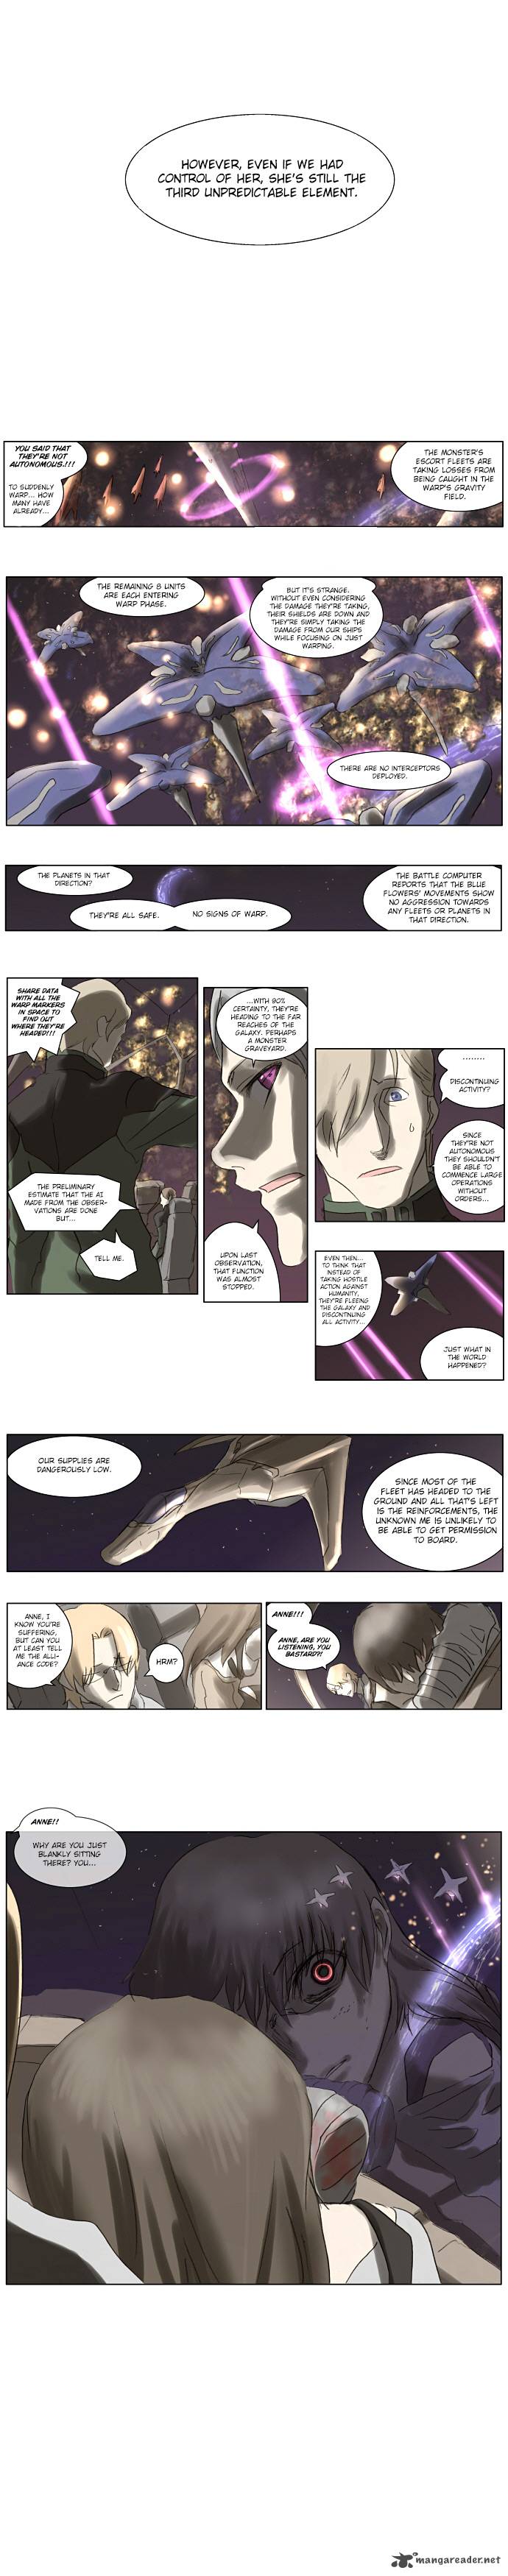 Knight Run Chapter 76 Page 4